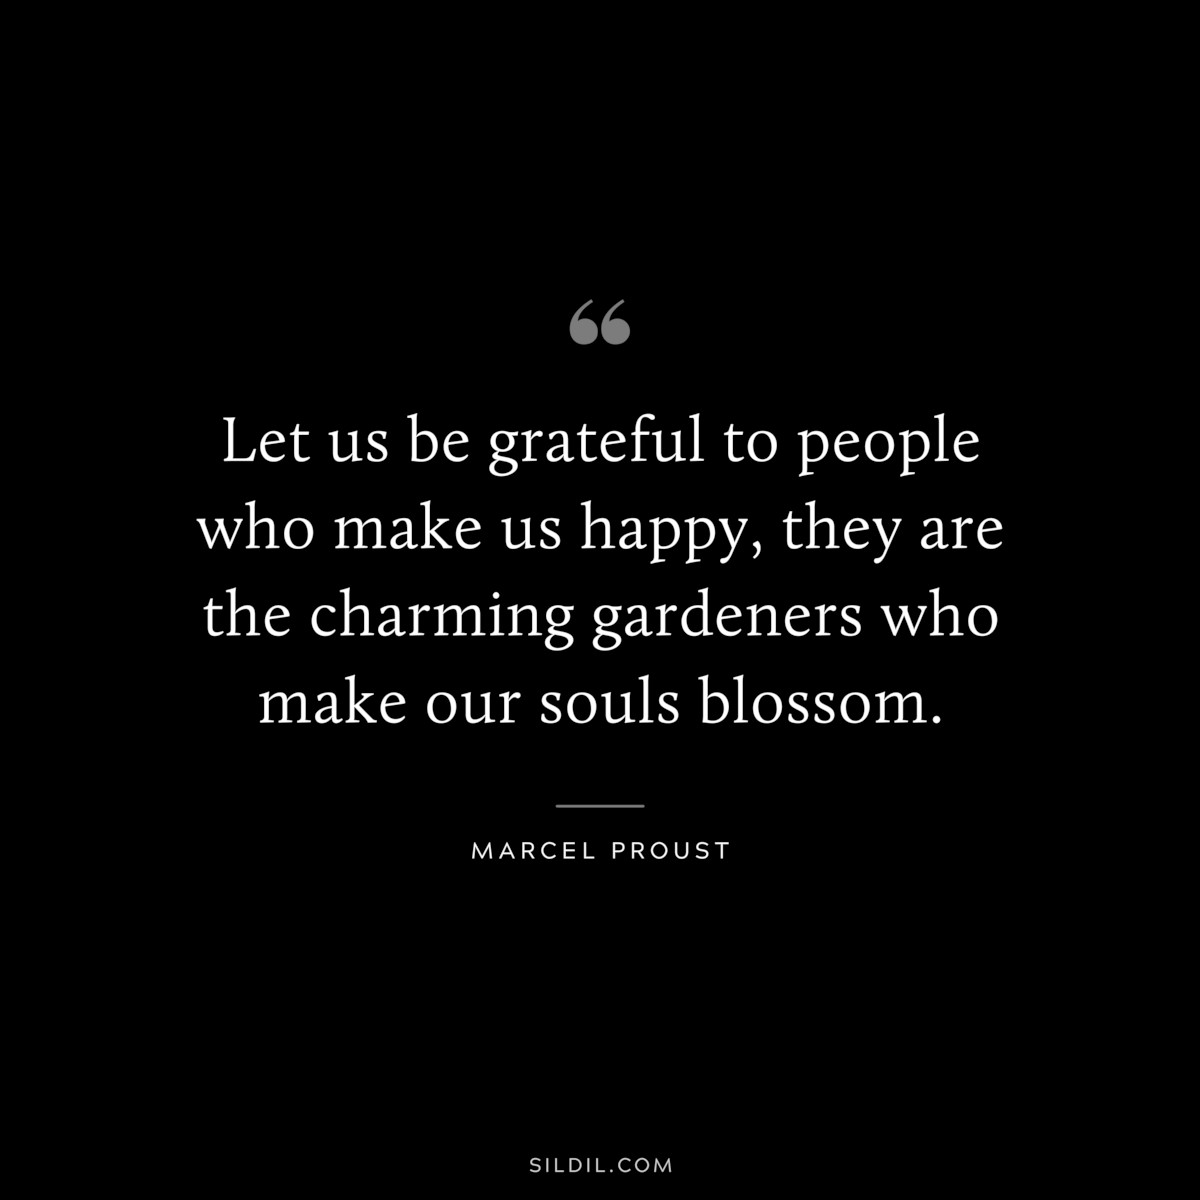 Let us be grateful to people who make us happy, they are the charming gardeners who make our souls blossom. ― Marcel Proust